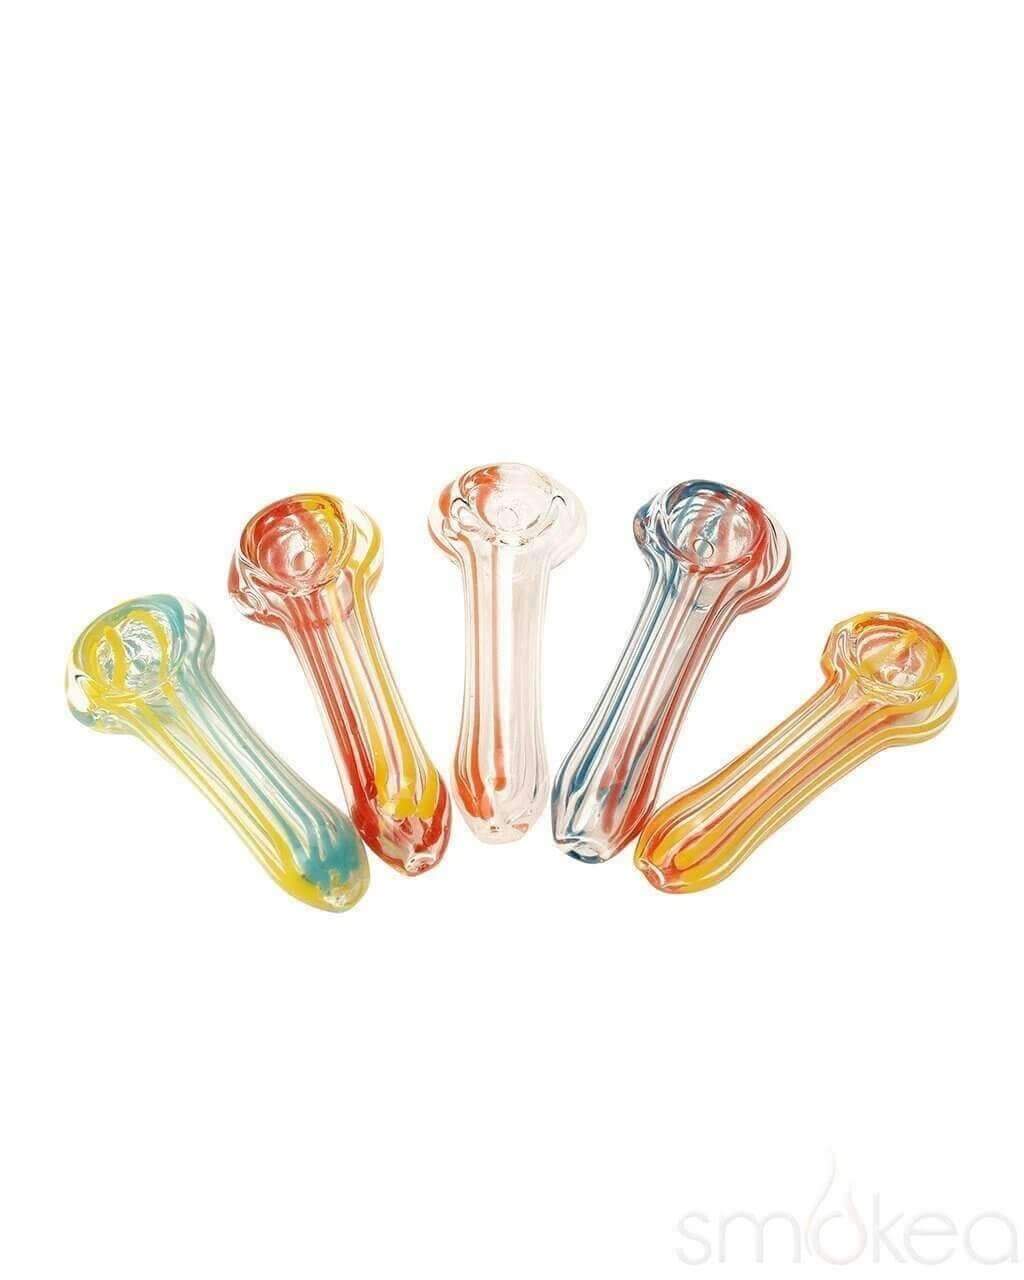 Pipes Tri Colored Smoking Glass Pipe for Weed